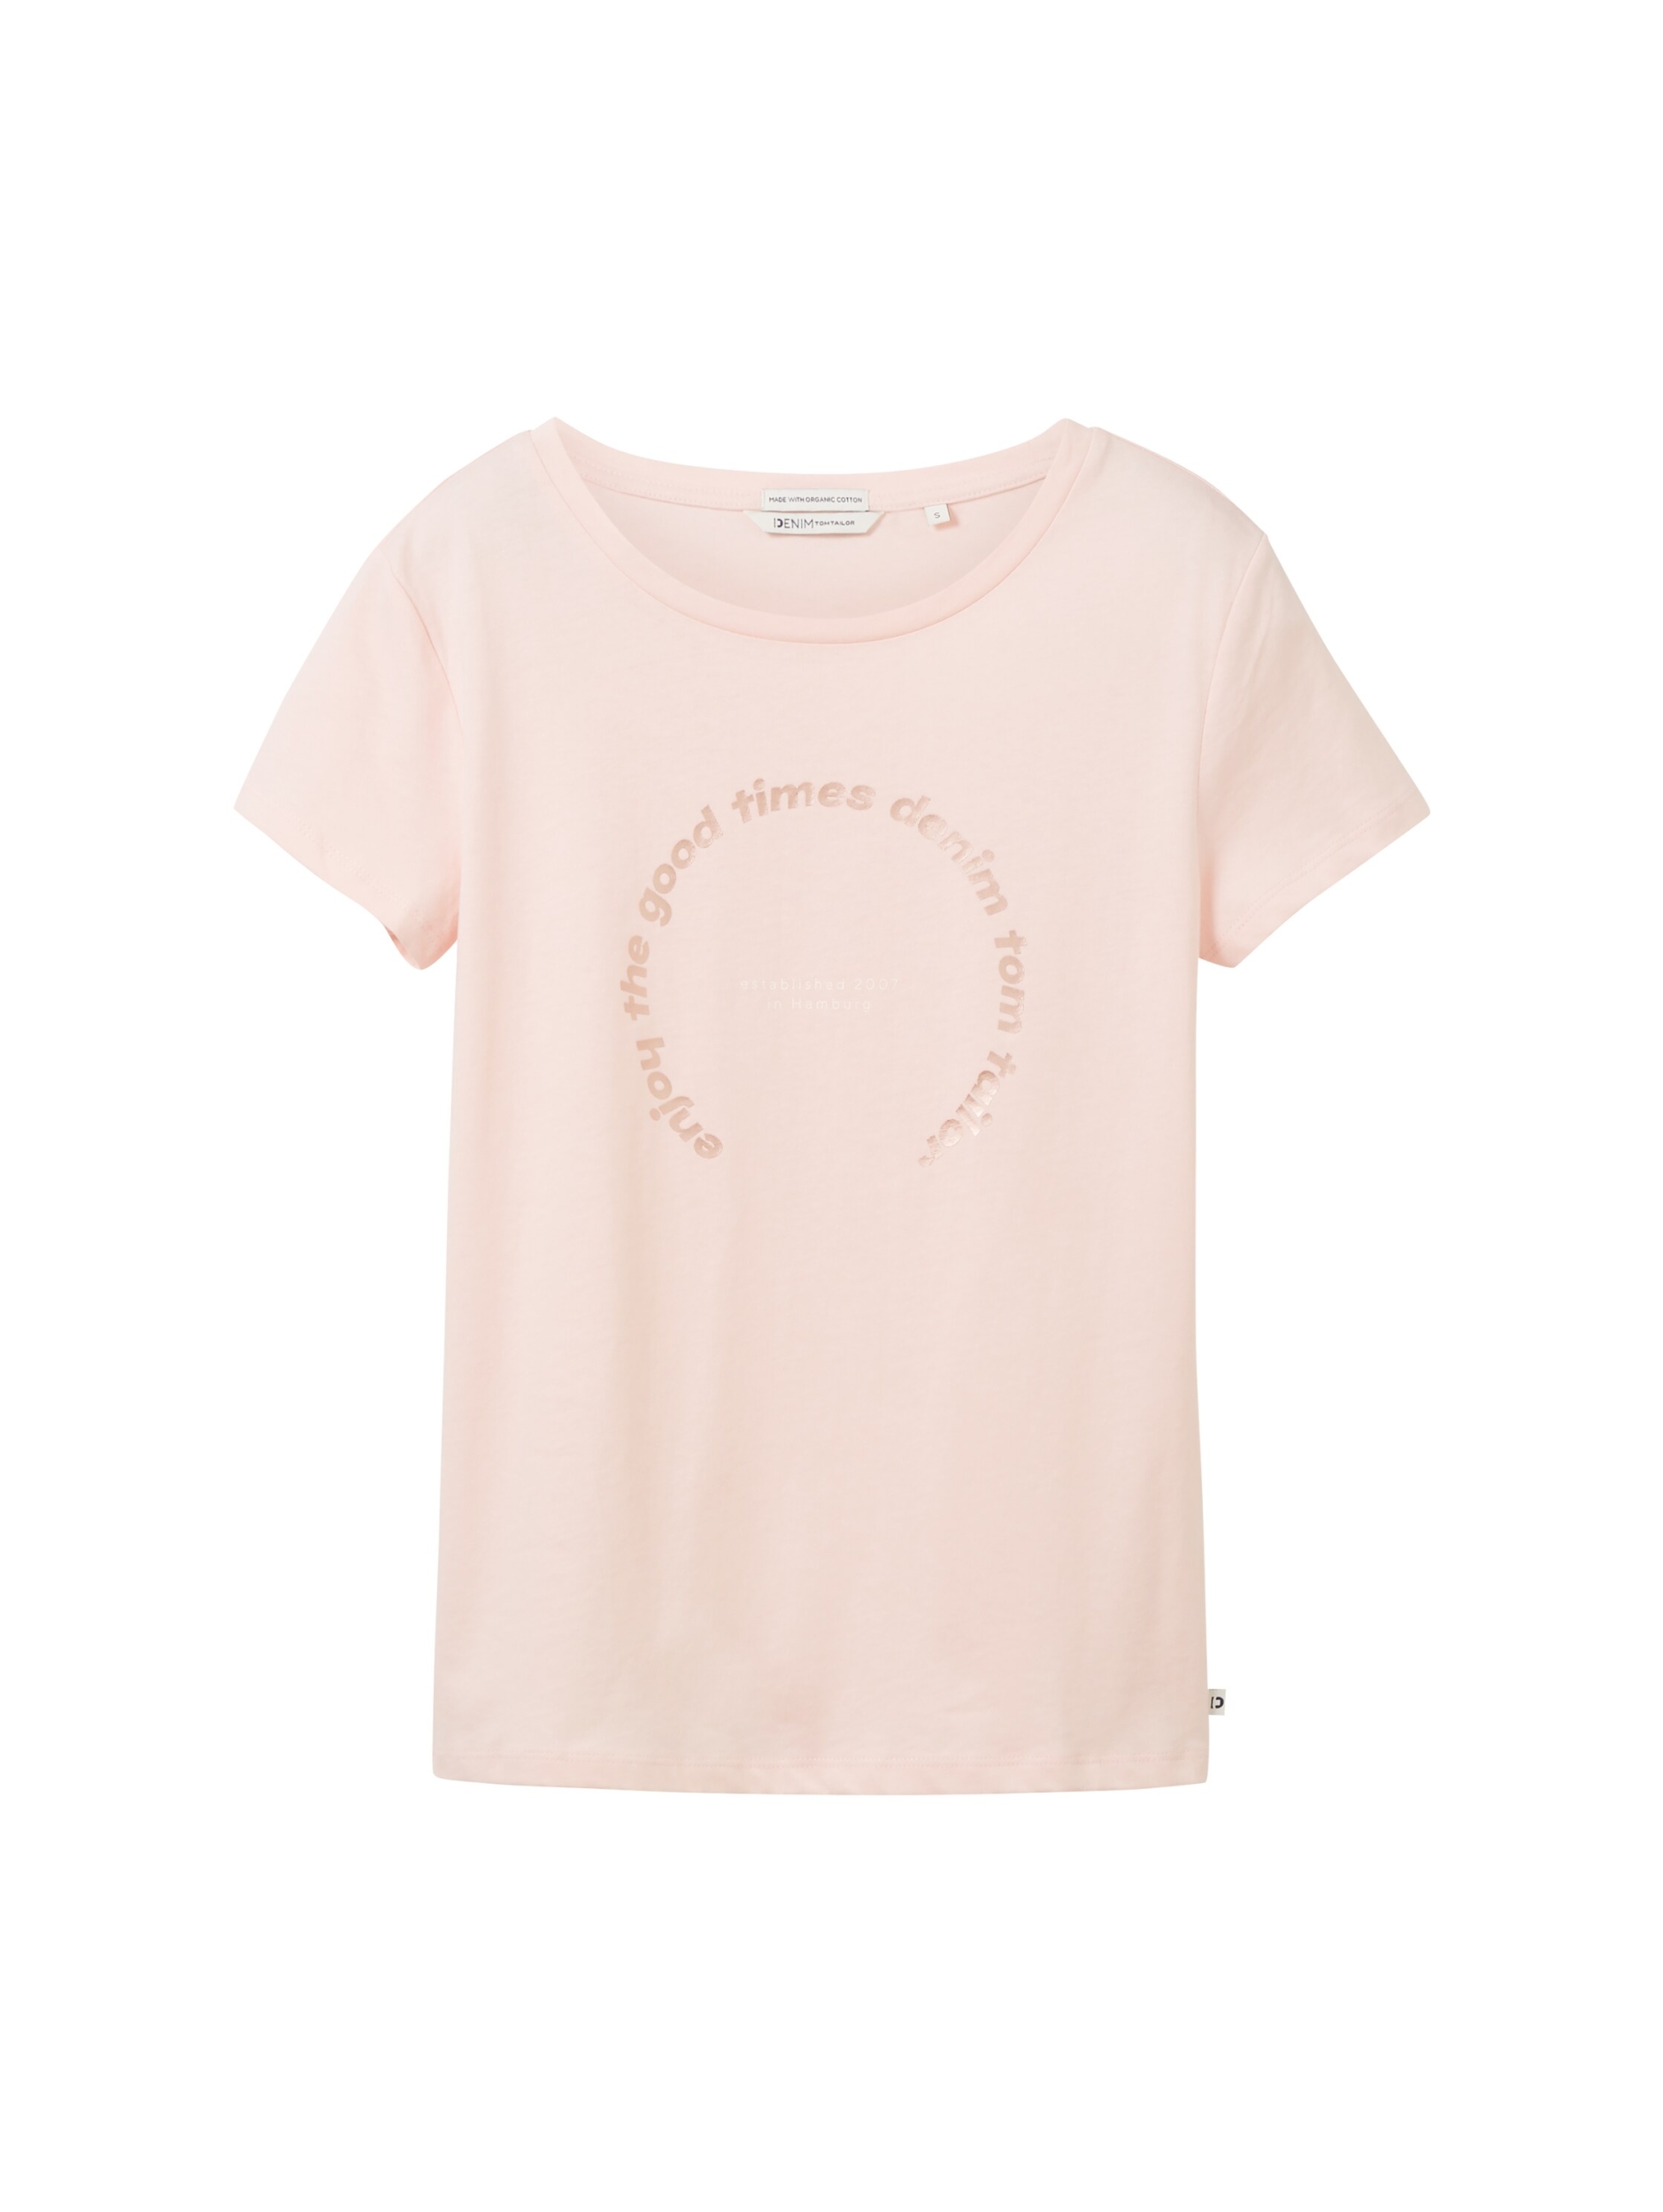 fitted T-shirt with print | M | light english rose | 1038353-14557_Light-M